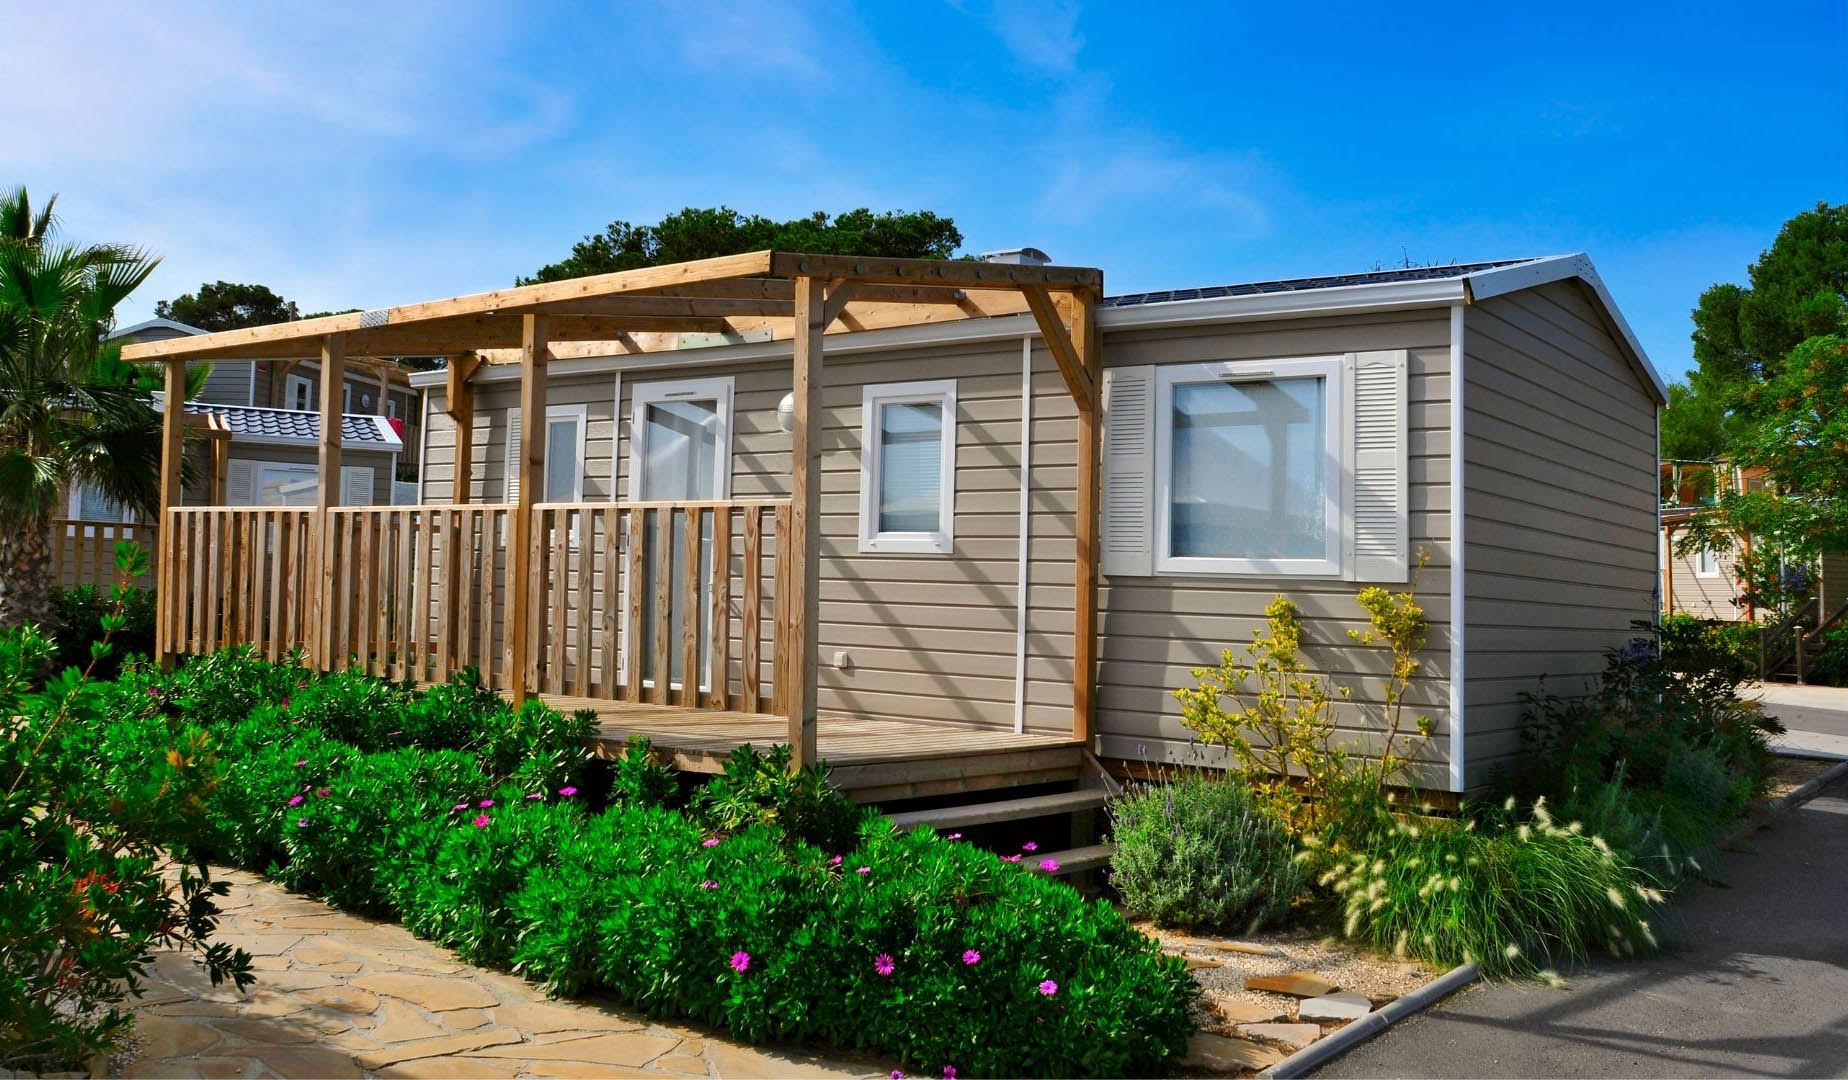 How to Start Mobile Home Investing